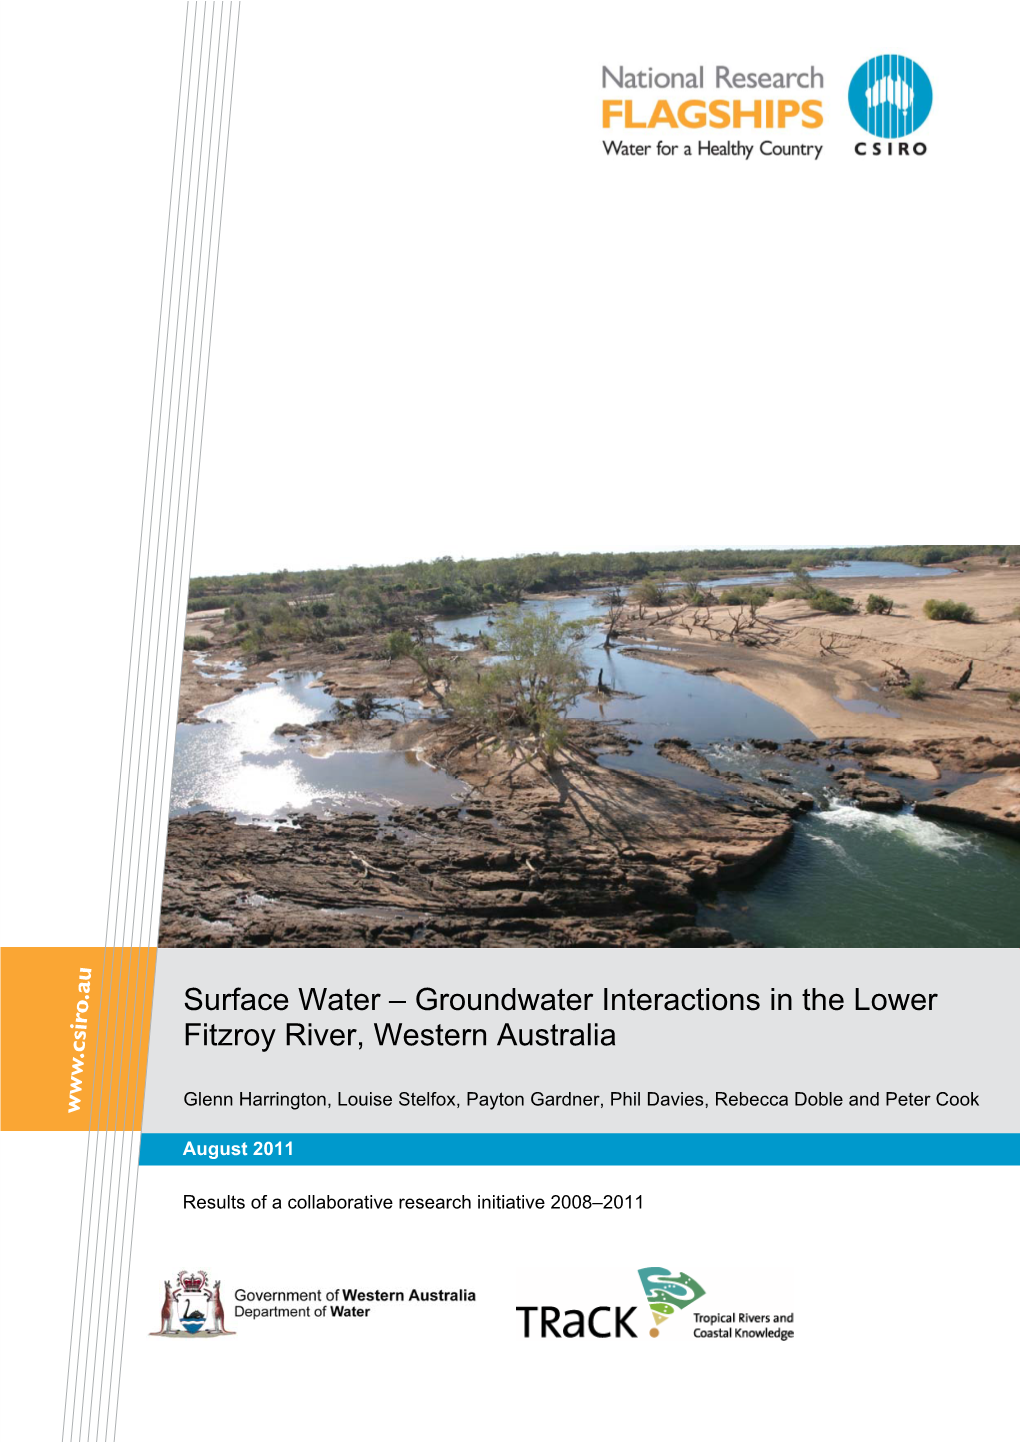 Groundwater Interactions in the Lower Fitzroy River, Western Australia